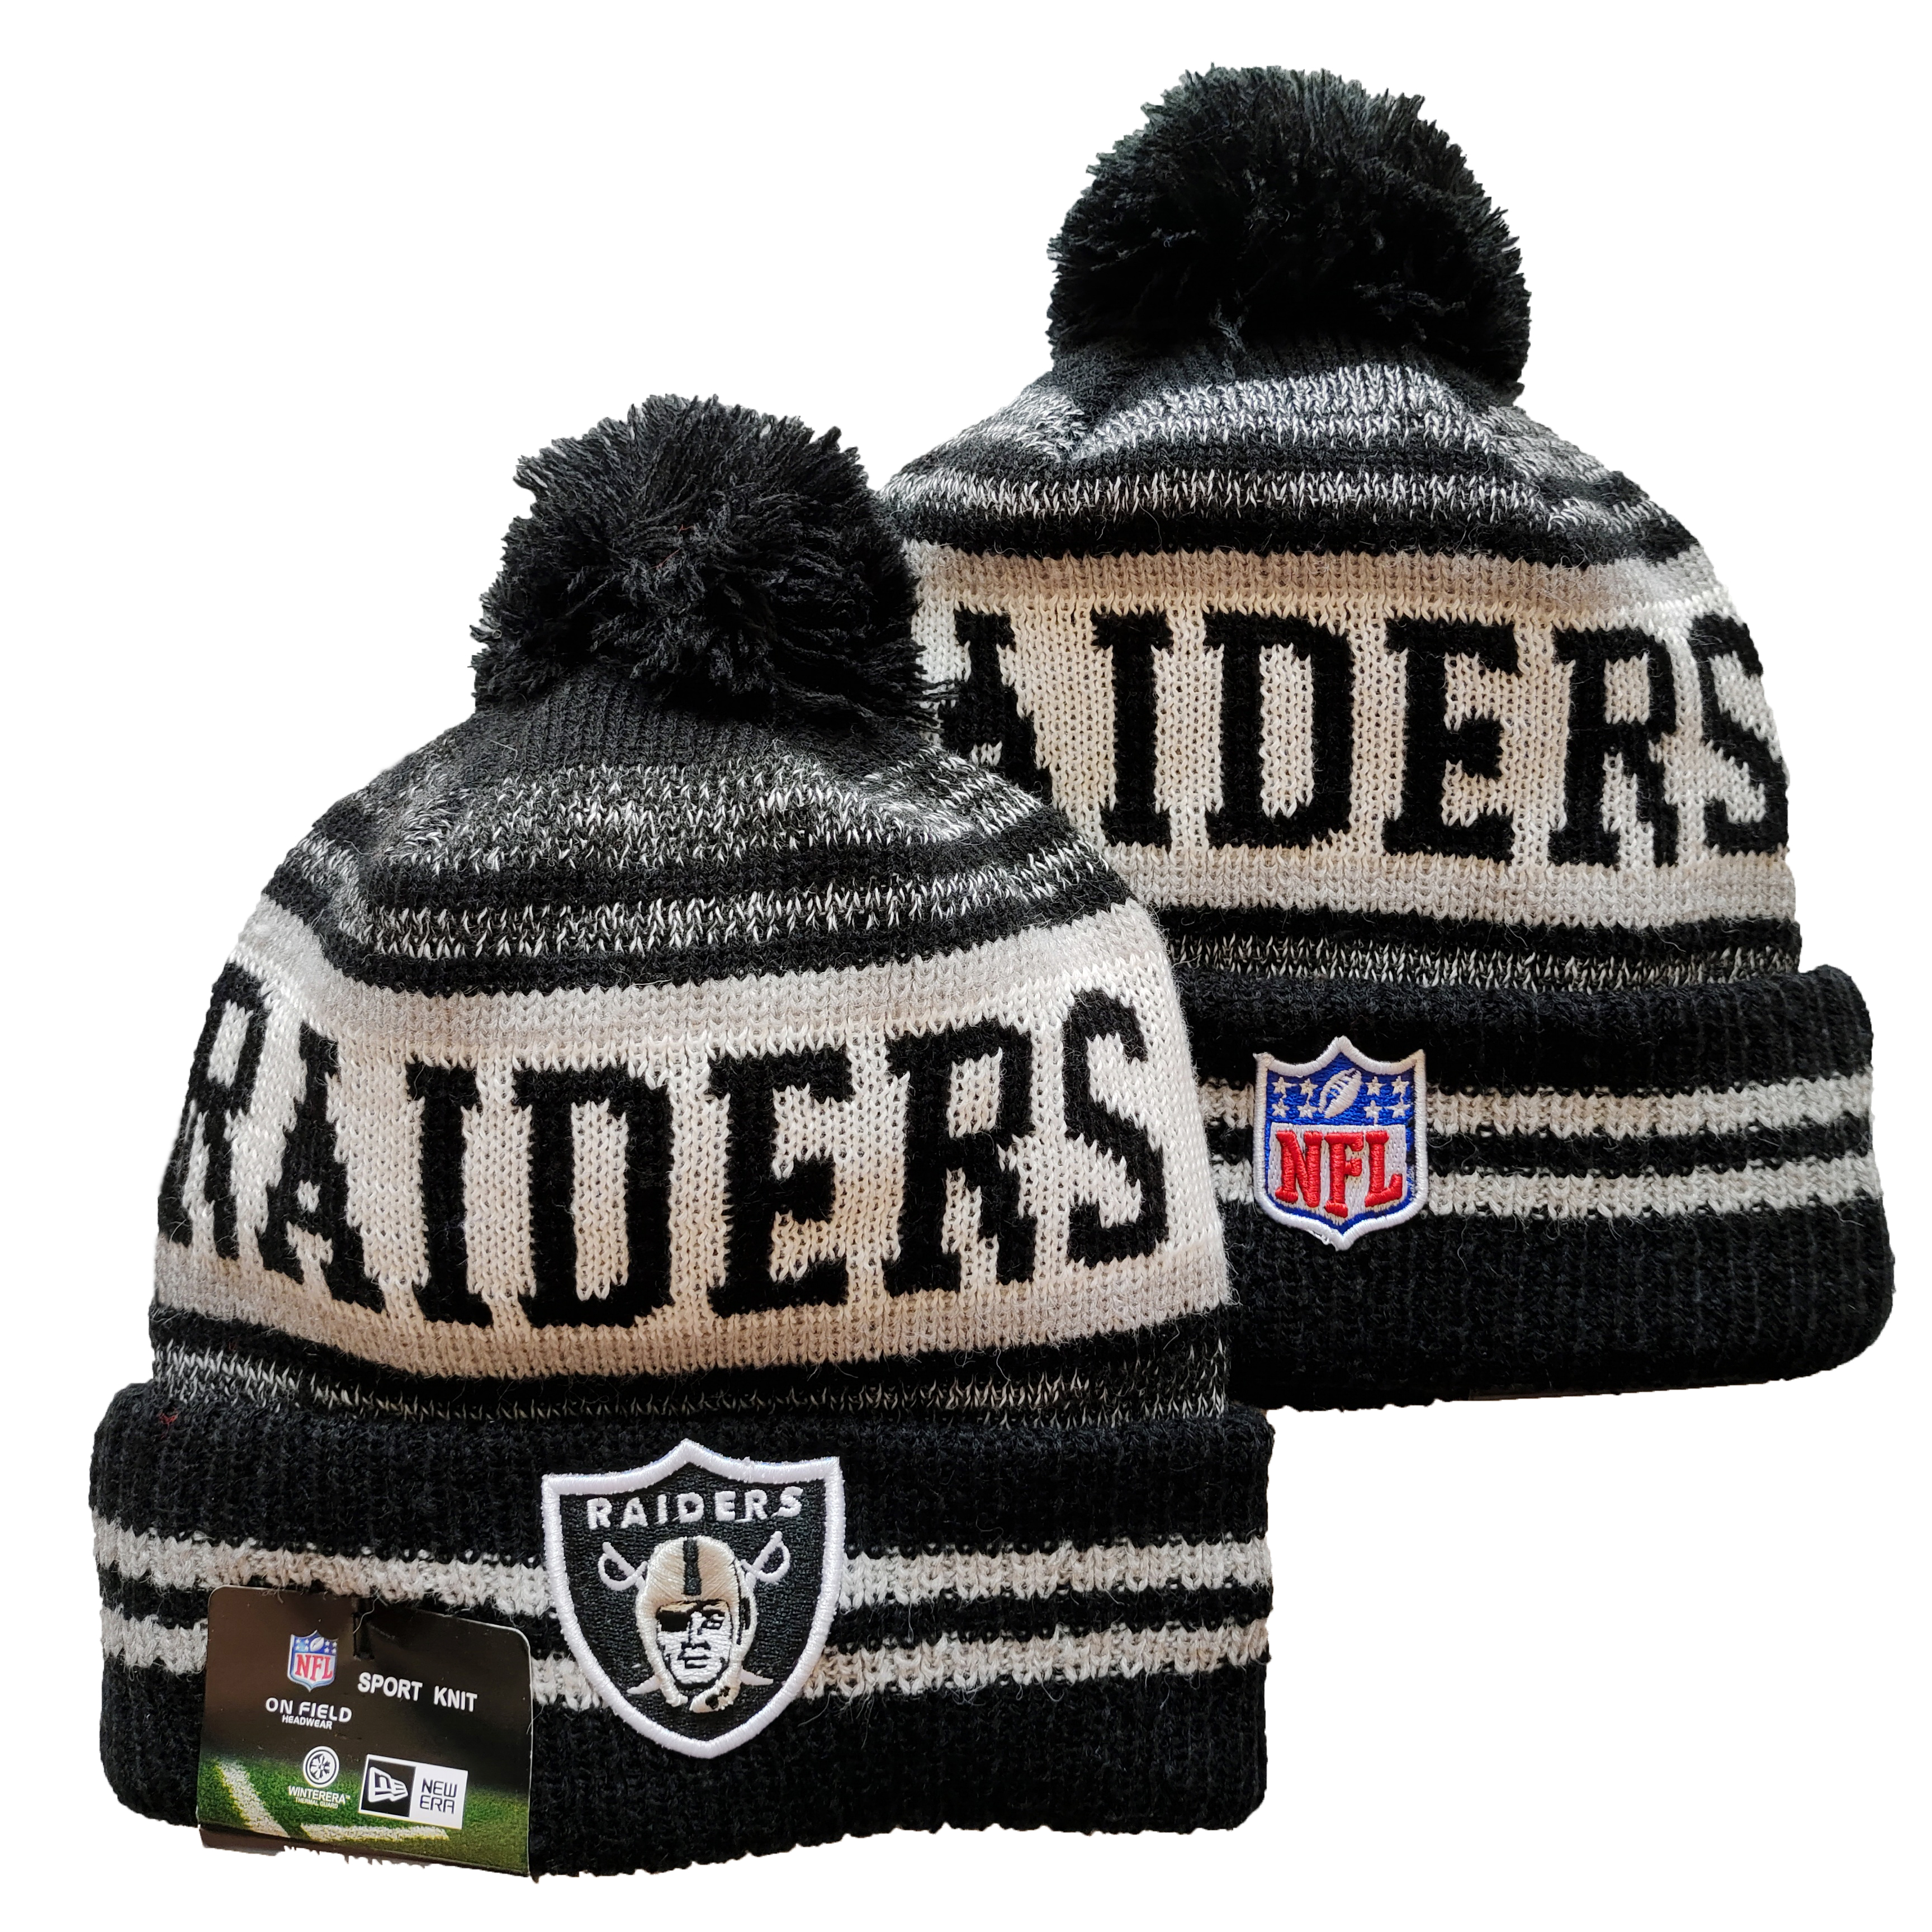 Raiders Team Logo Black and Gray Pom Cuffed Knit Hat YD - Click Image to Close